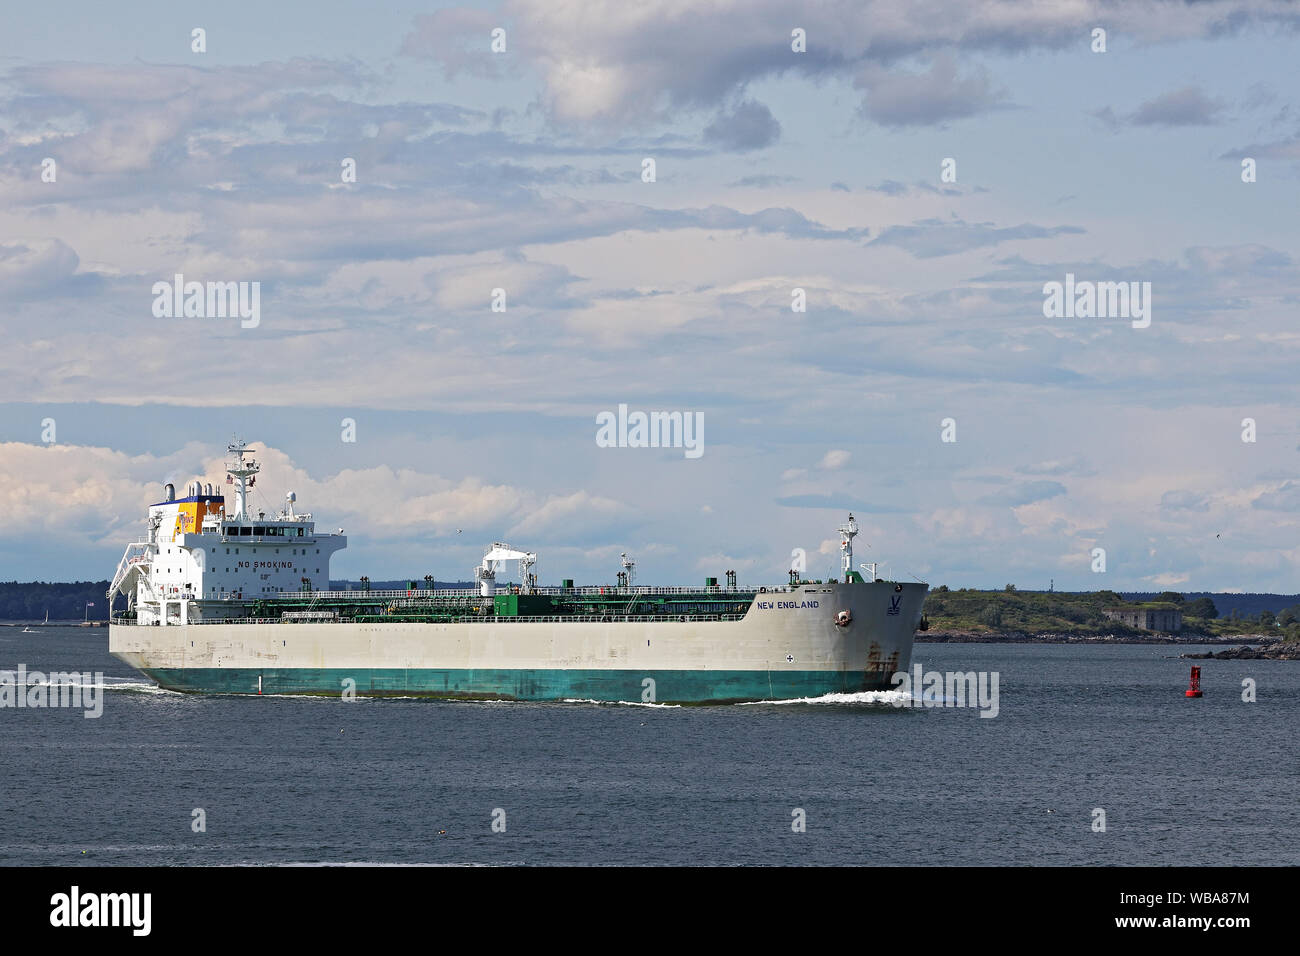 Portland, Maine - August 10, 2019: View of Danforth cove and a big cargo ship from Fort Williams Park in Portland, Main Stock Photo